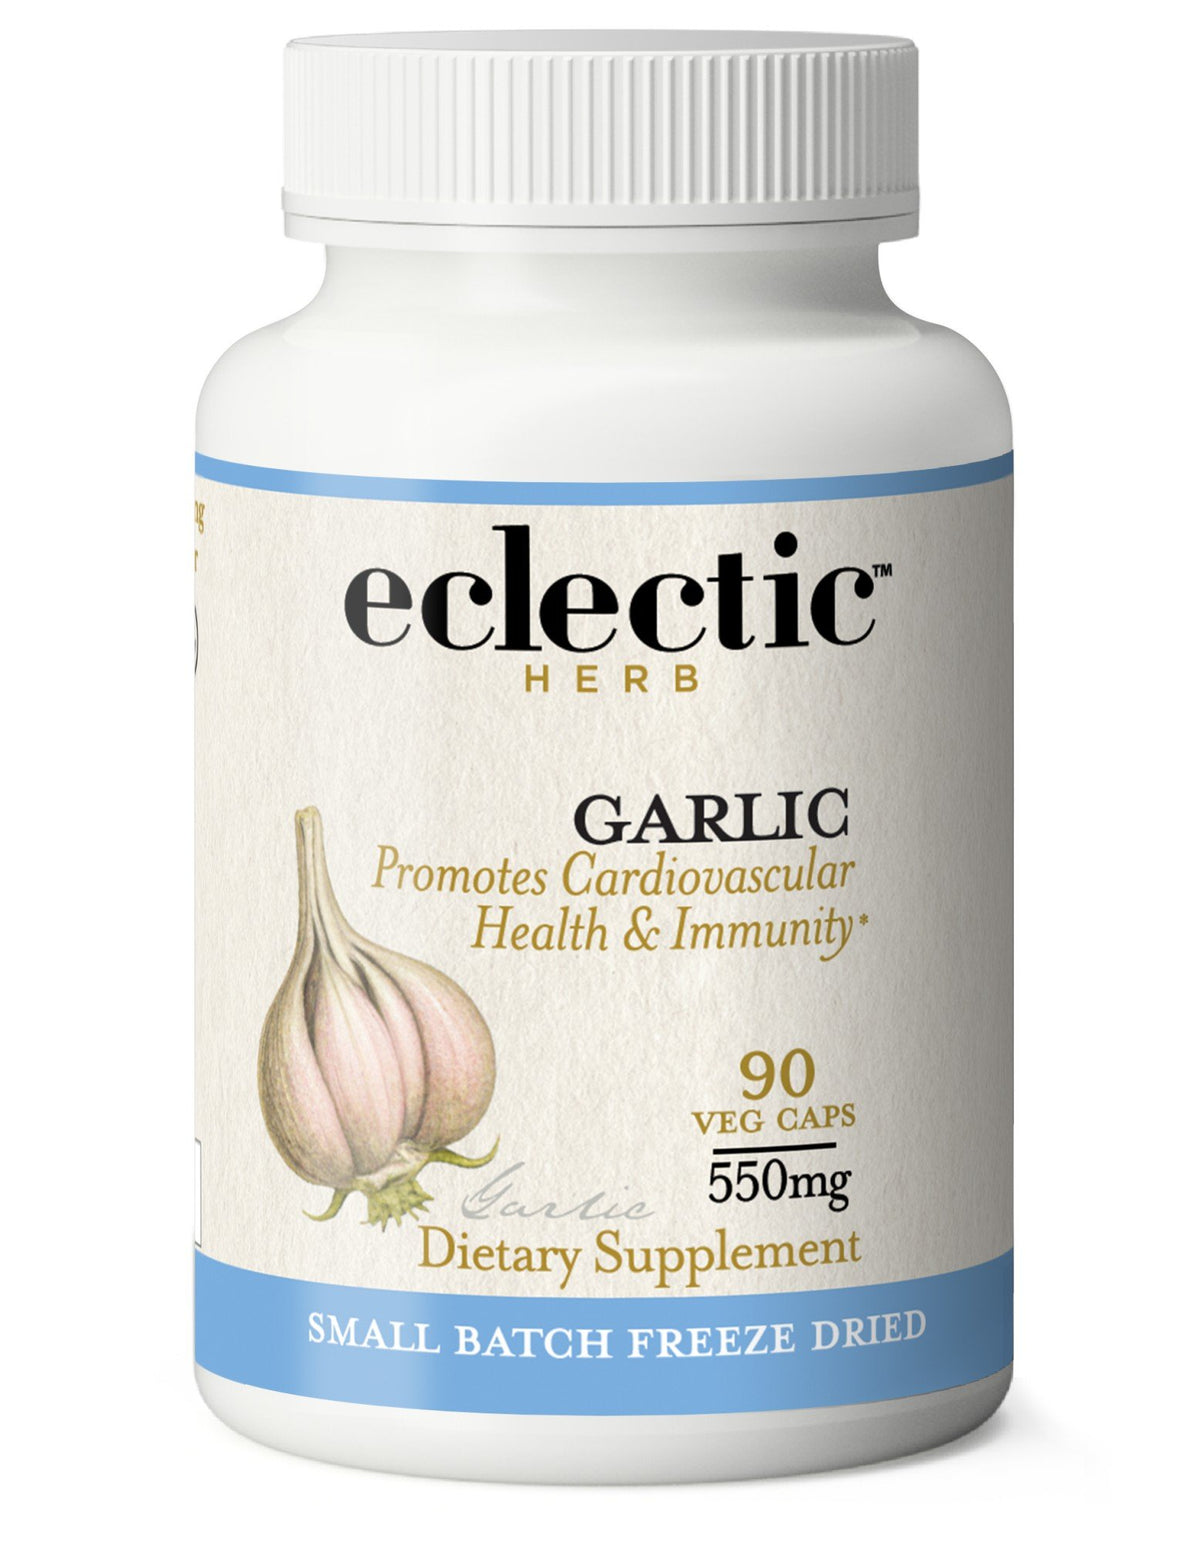 Eclectic Herb Garlic 550mg Freeze-Dried Odor Controlled 90 VegCap